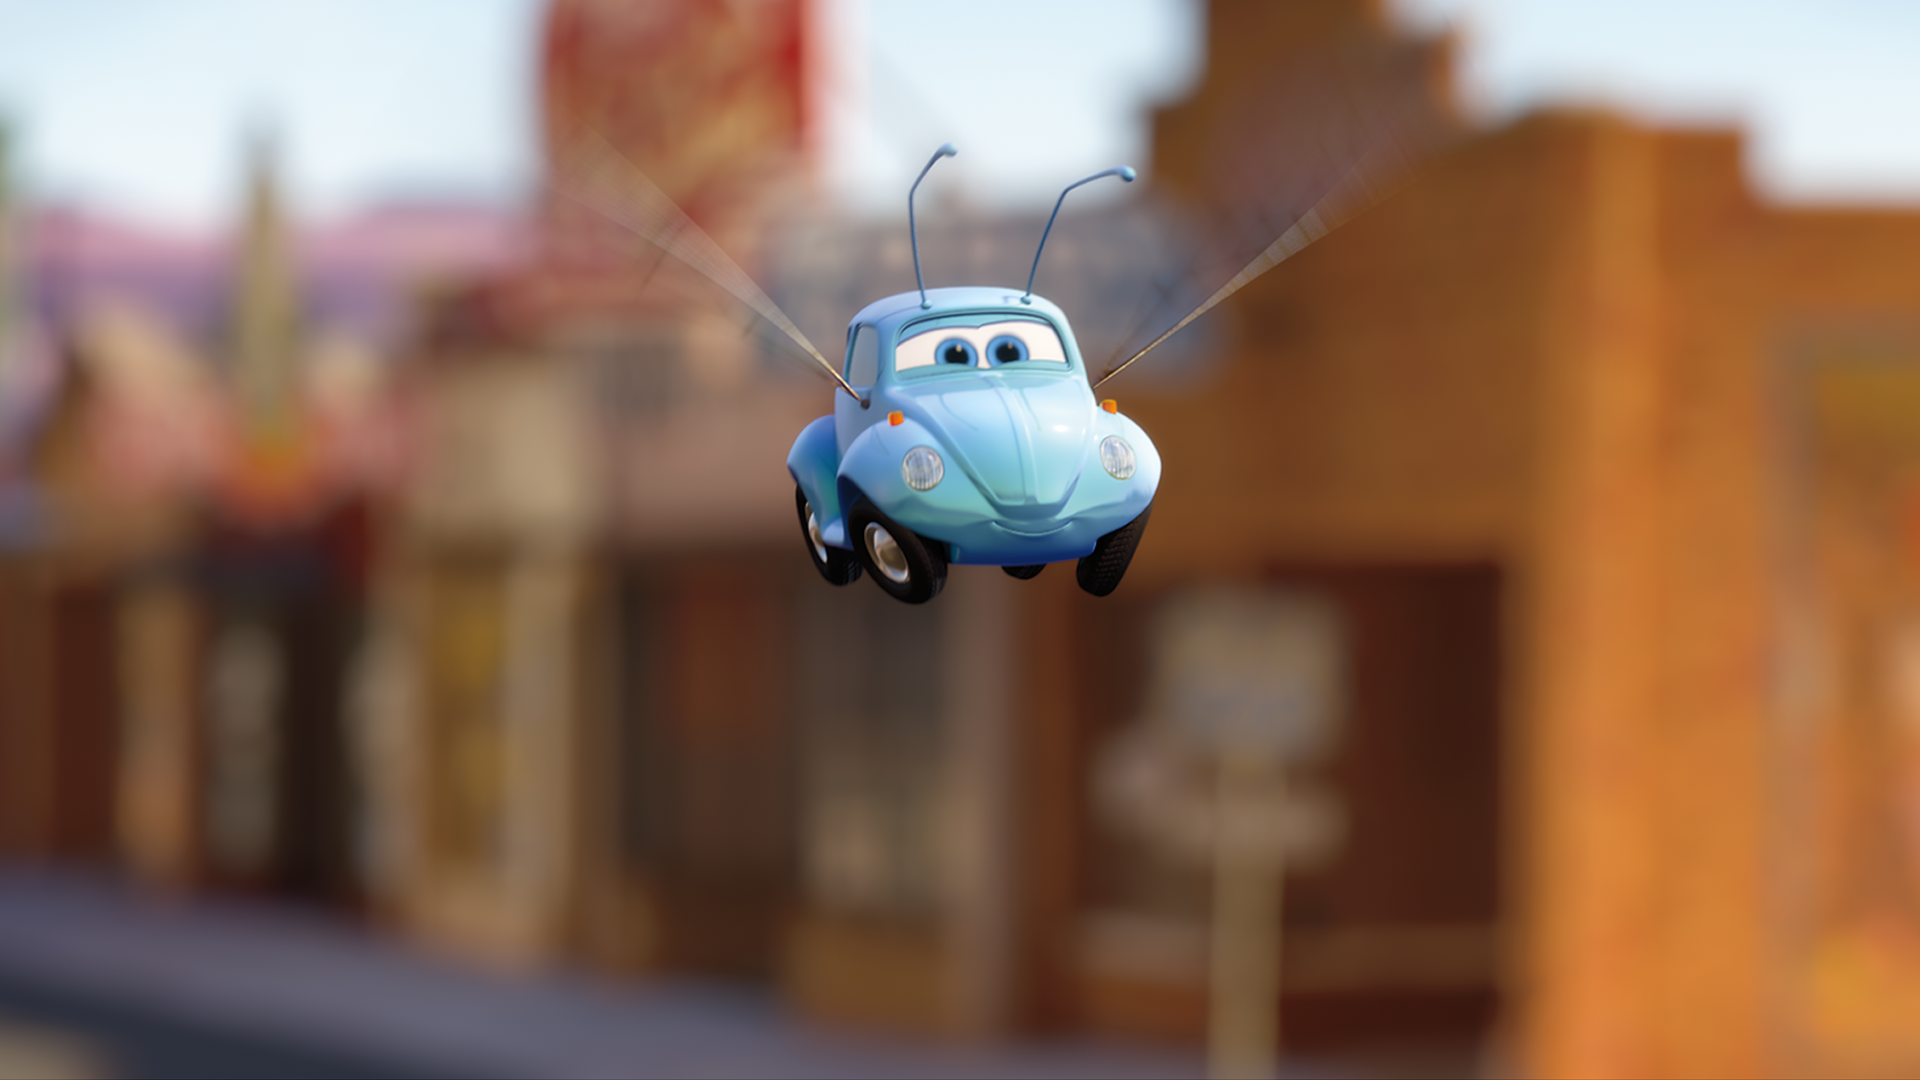 Cars-Toons: Bugged